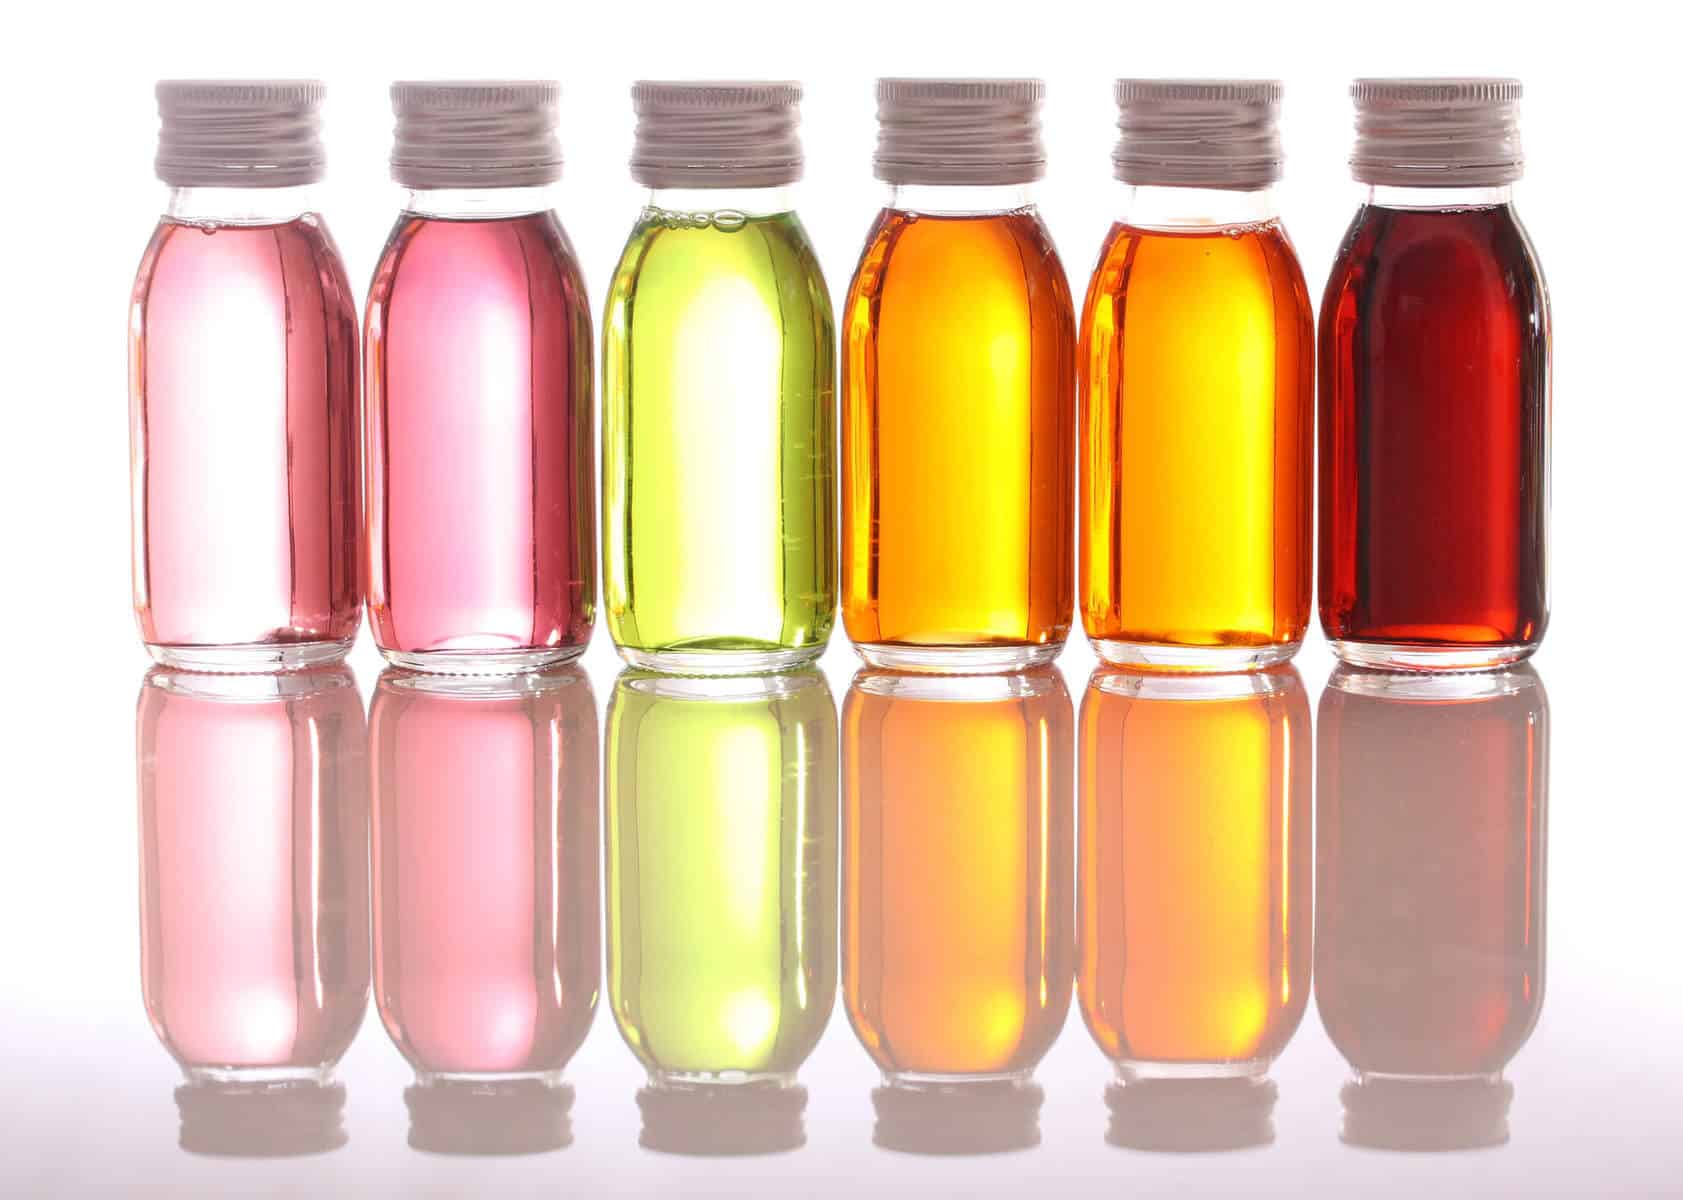 Where to buy essential oils